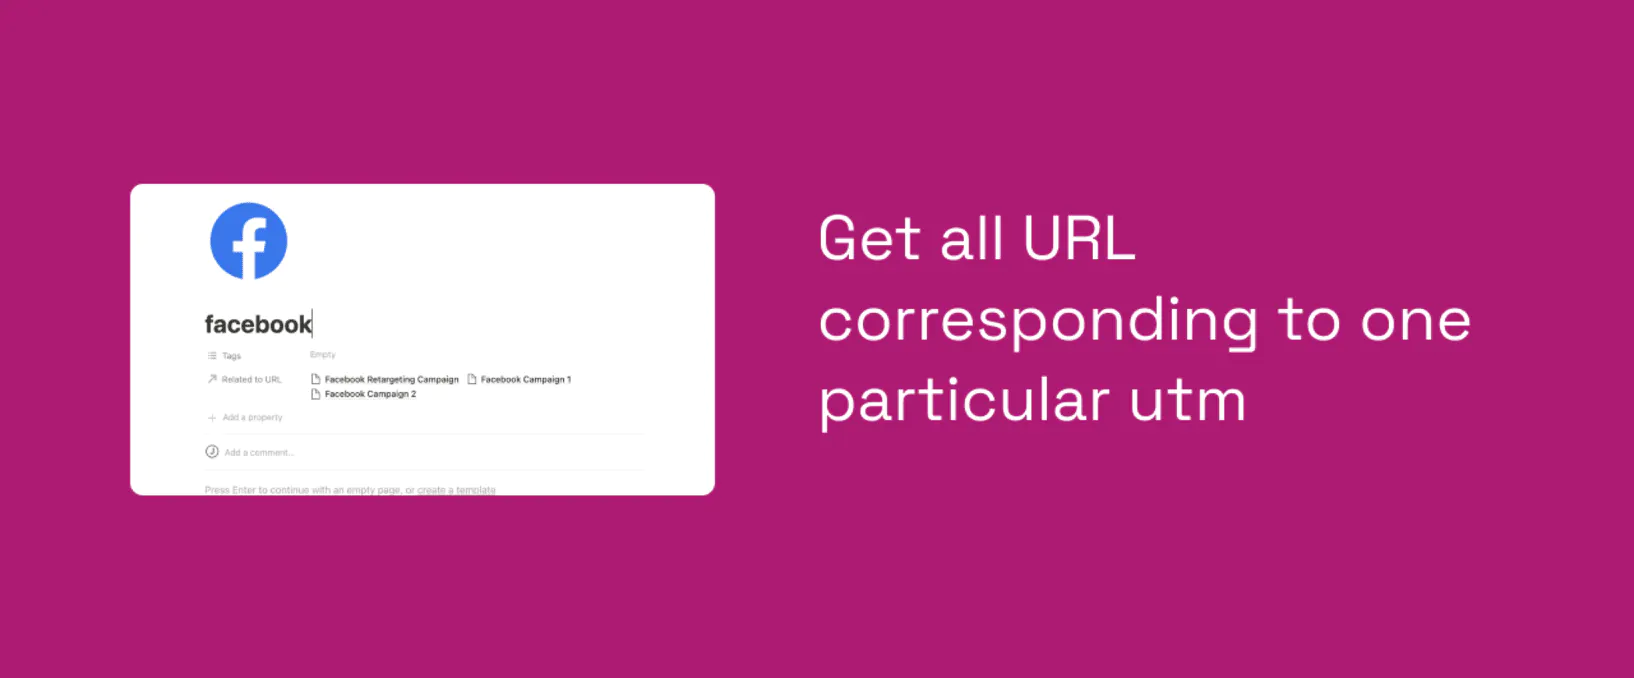 Get all URL corresponding to one perticular utm.